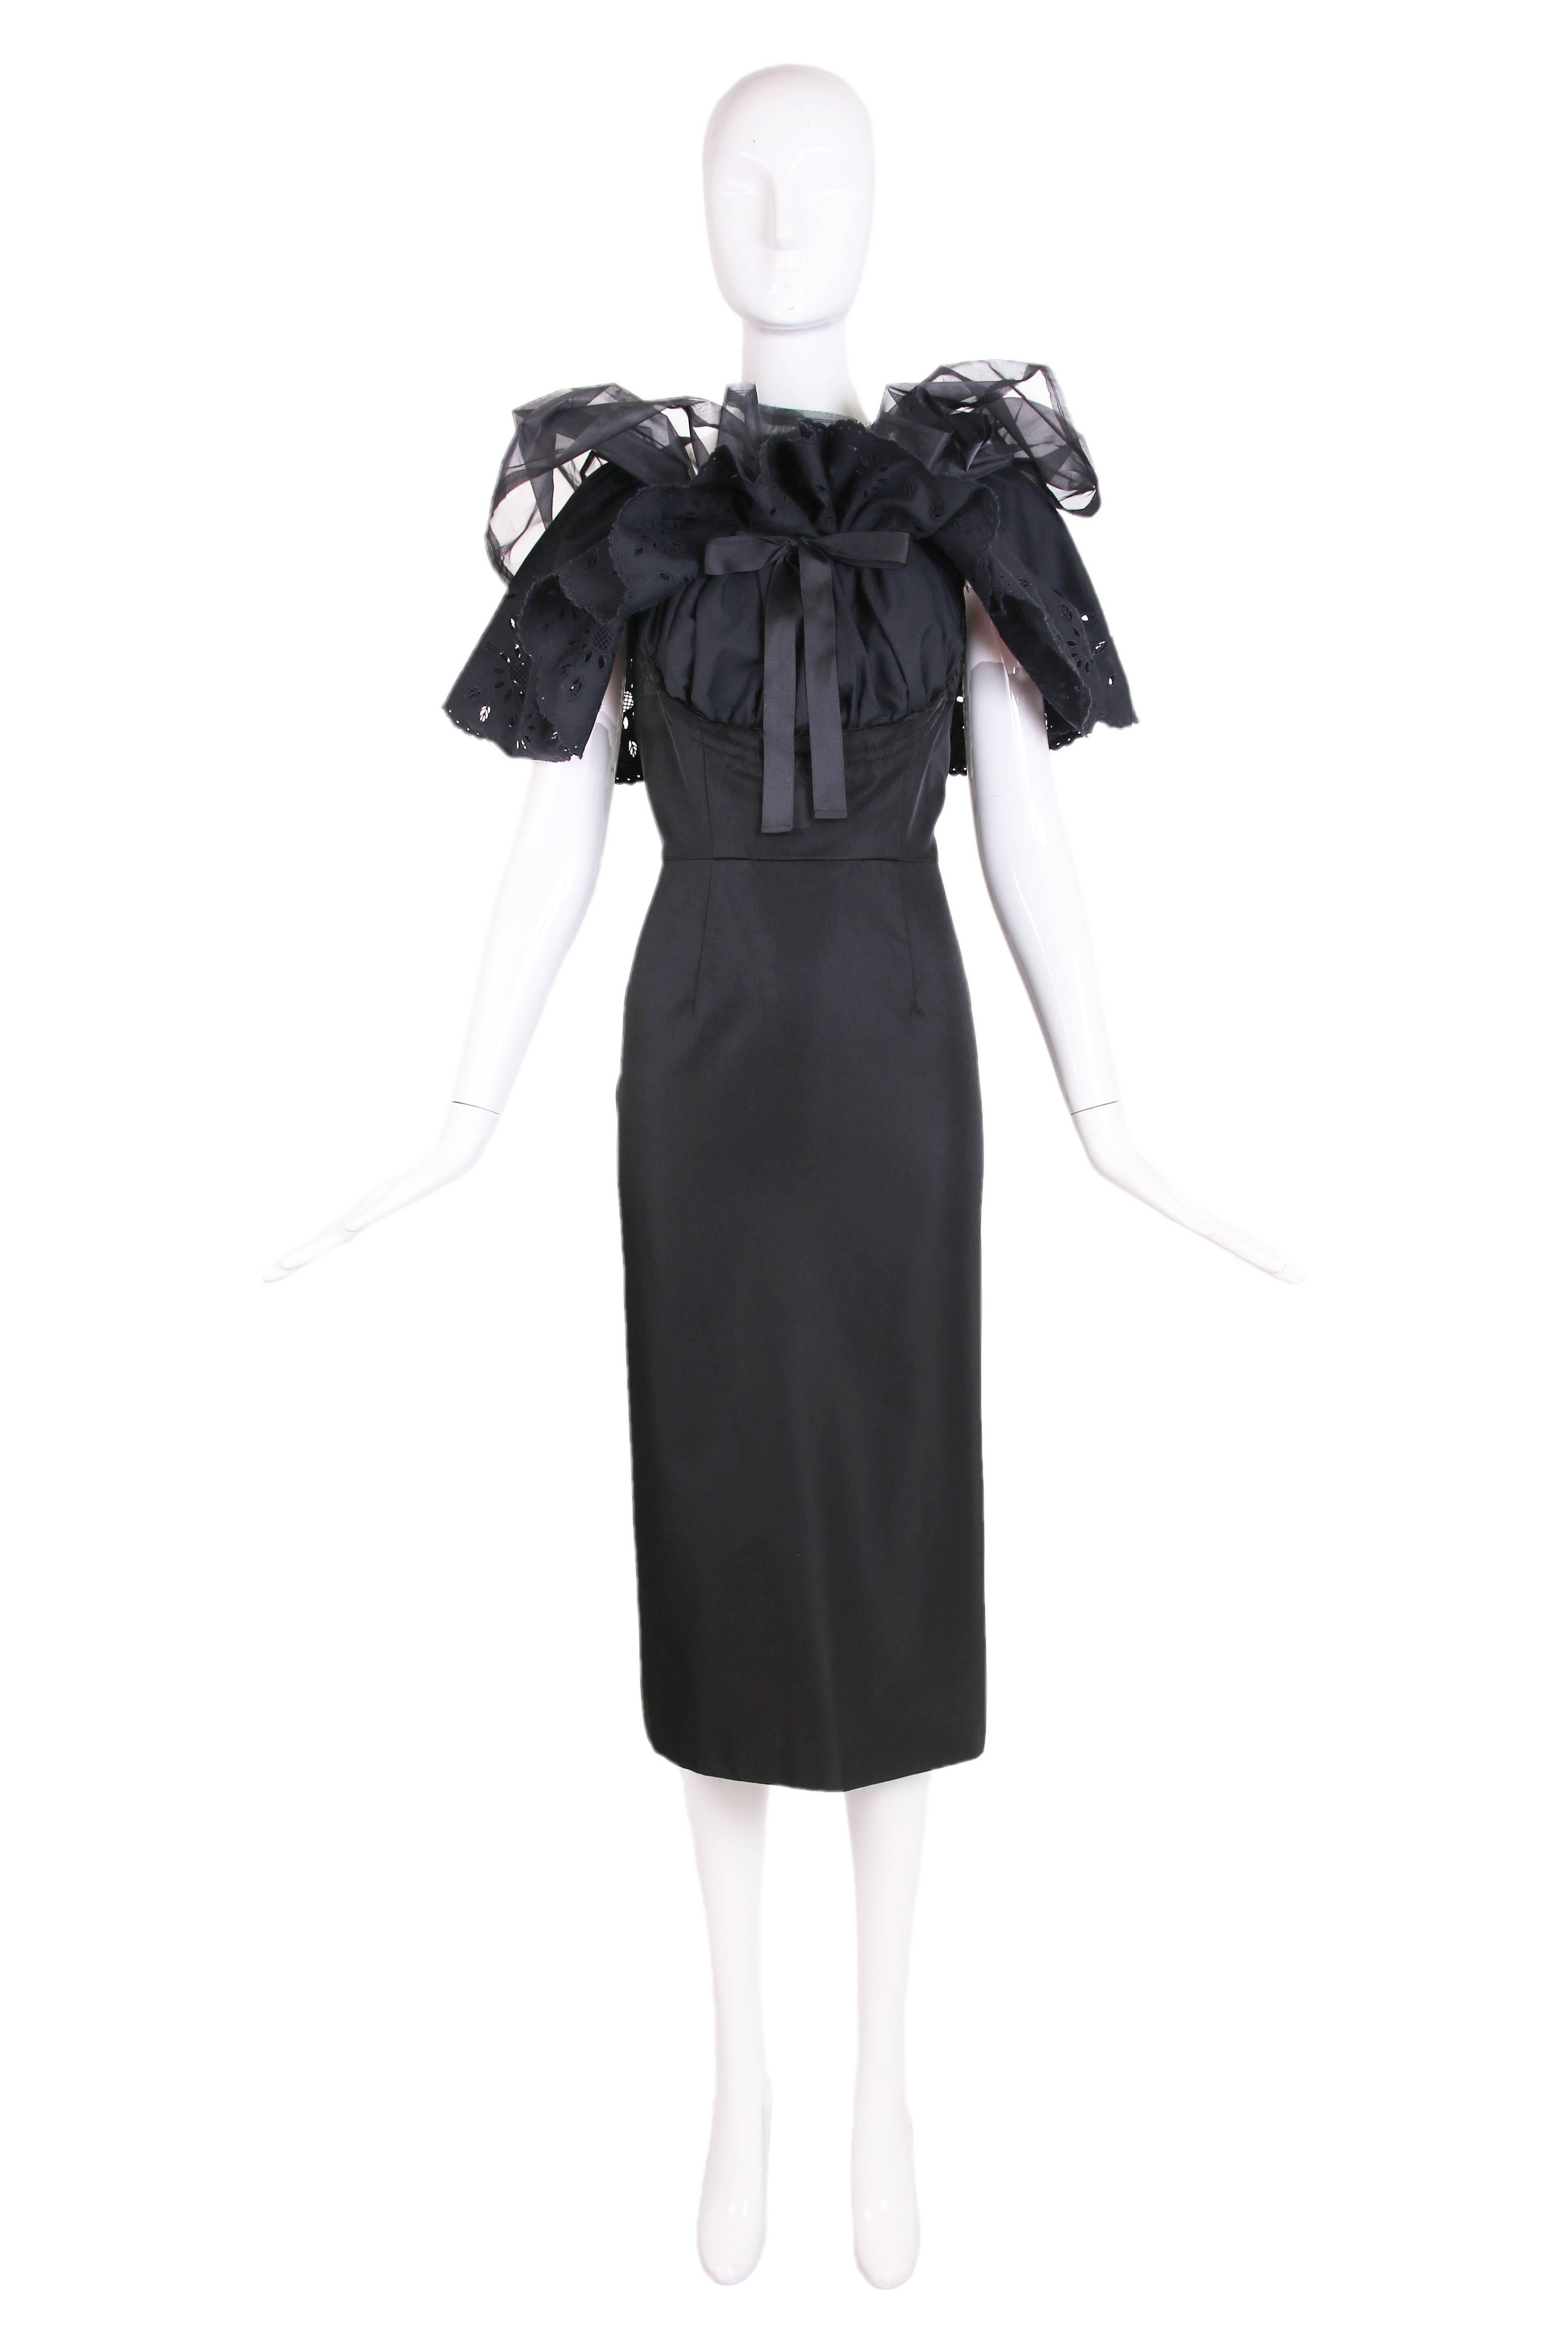 2001 Comme Des Garcons black sleeveless shift dress with exaggerated collar comprising a layer of cotton eyelet lace and sheer nylon that continues below the waistline and is gathered at center from with attached ties. This piece is in excellent